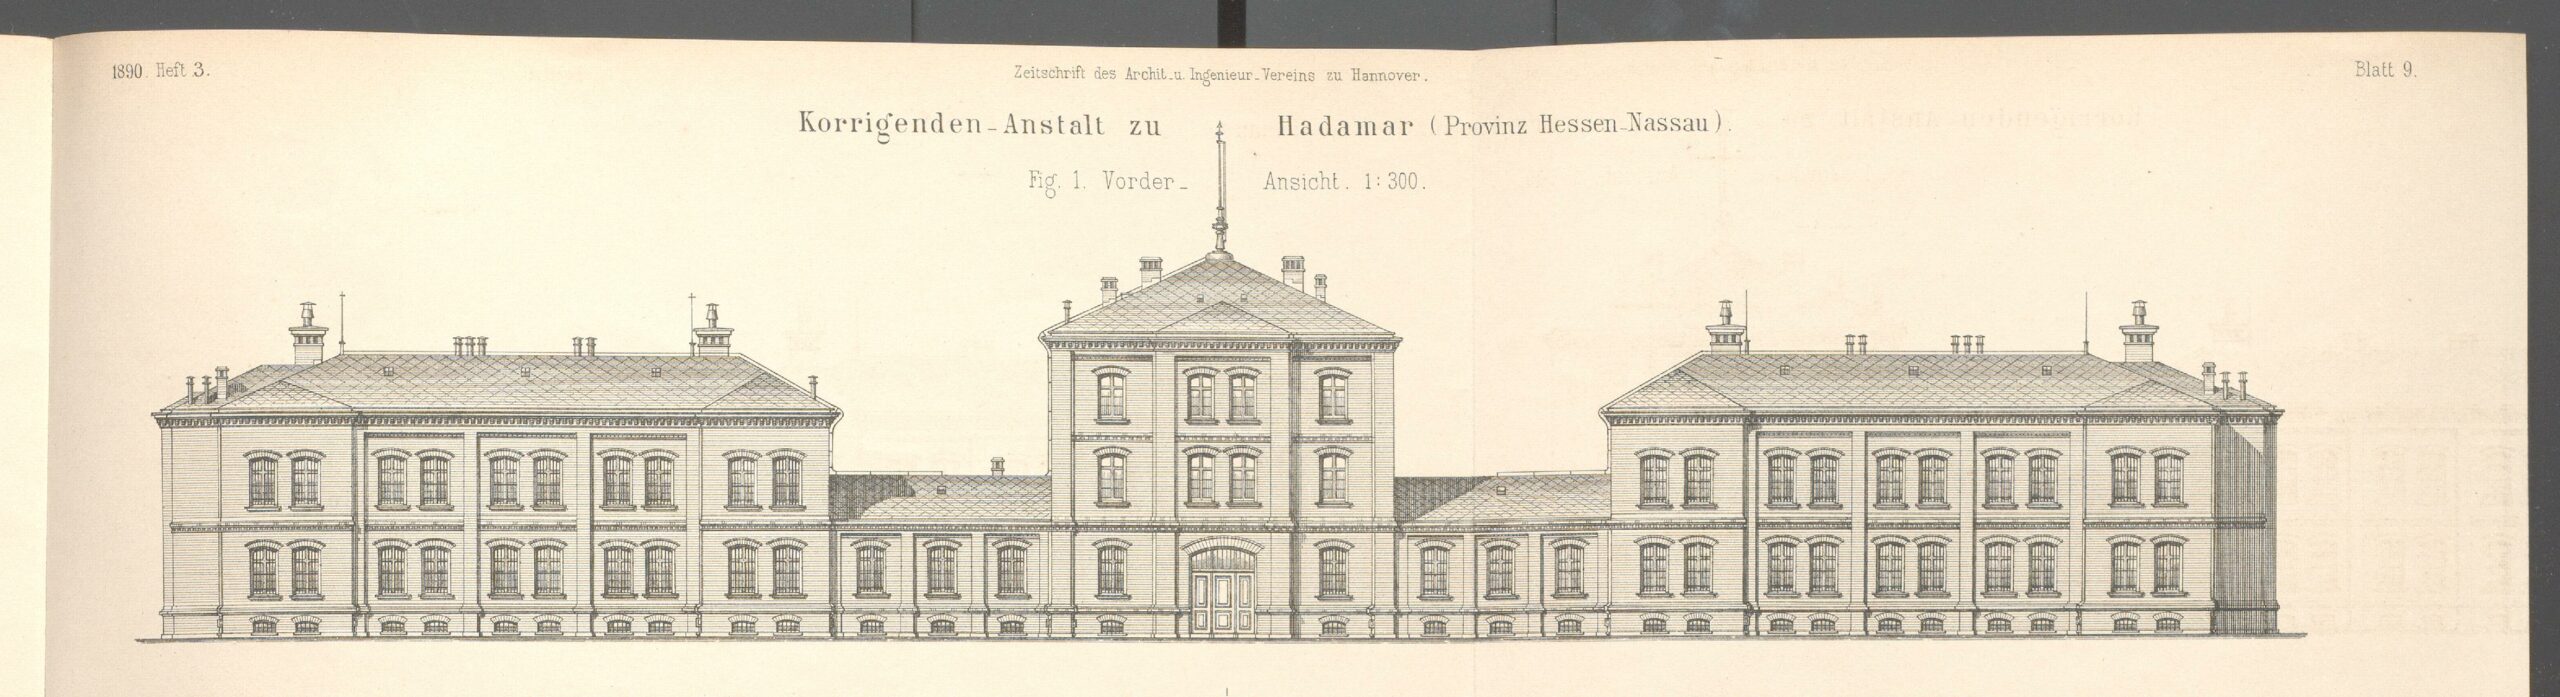 Black and white drawing of the front of a large building bearing the title Hadamar Correctional Facility (Korrigenden-Anstalt zu Hadamar).